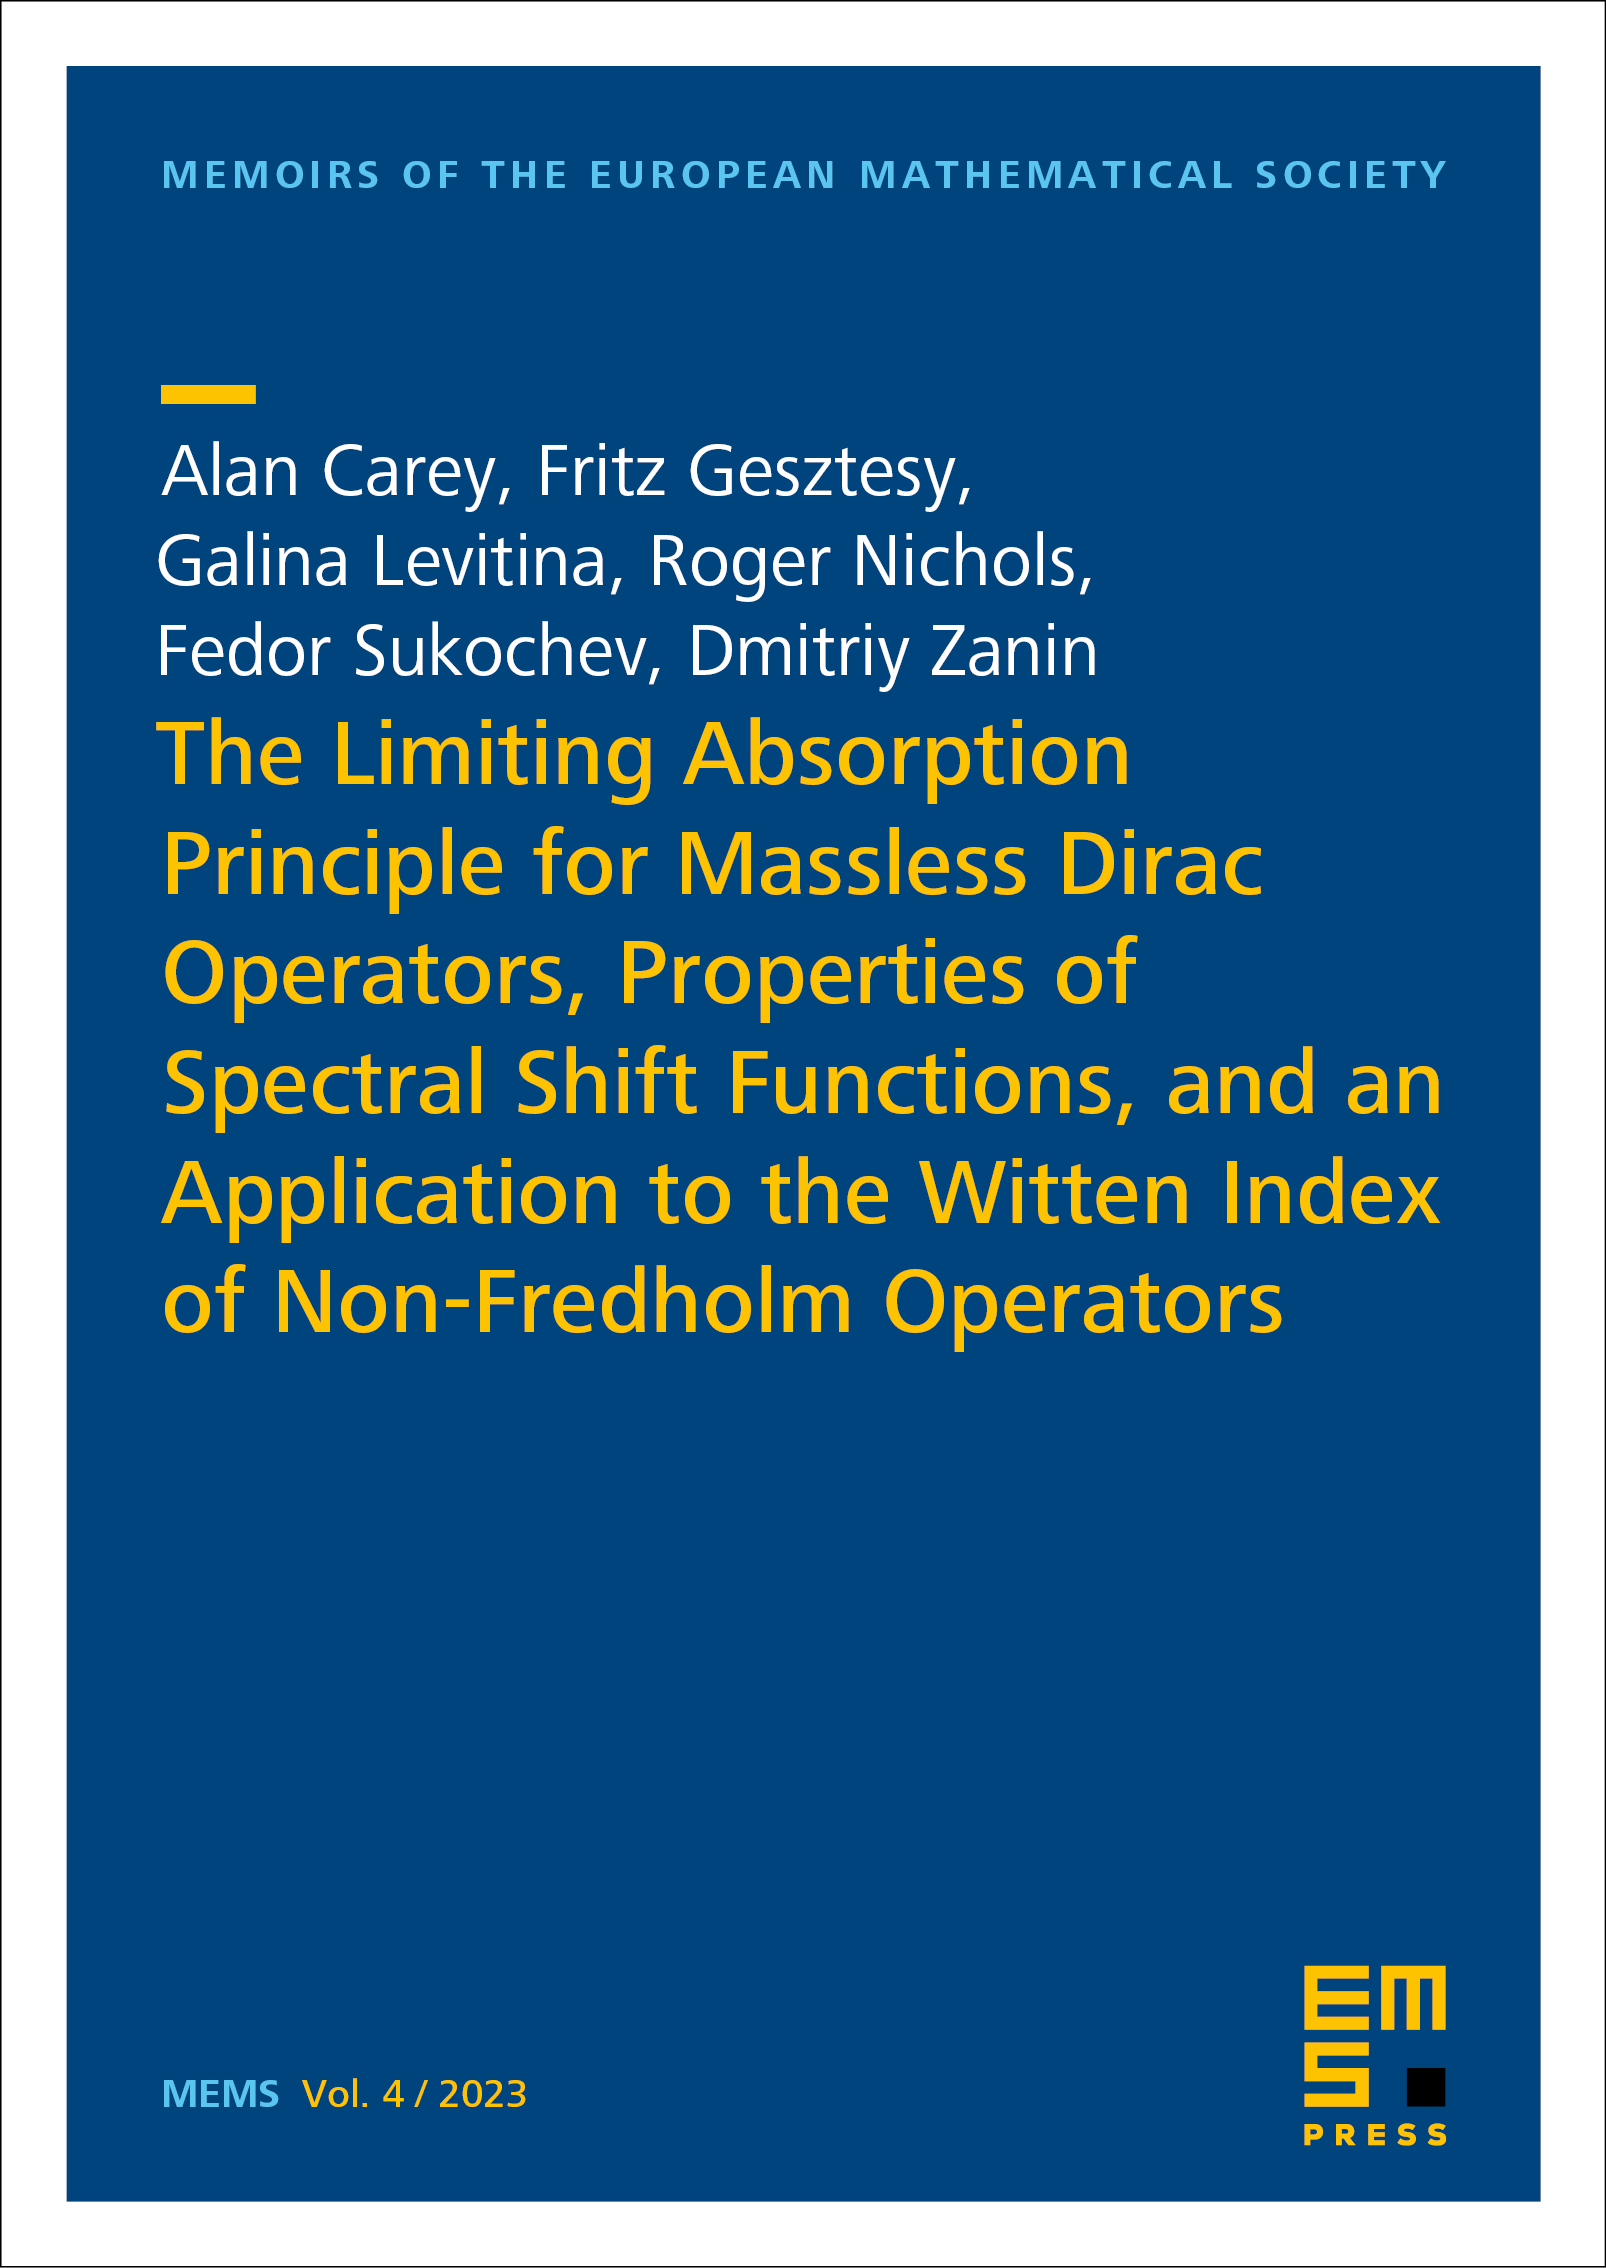 The Limiting Absorption Principle for Massless Dirac Operators, Properties of Spectral Shift Functions, and an Application to the Witten Index of Non-Fredholm Operators cover